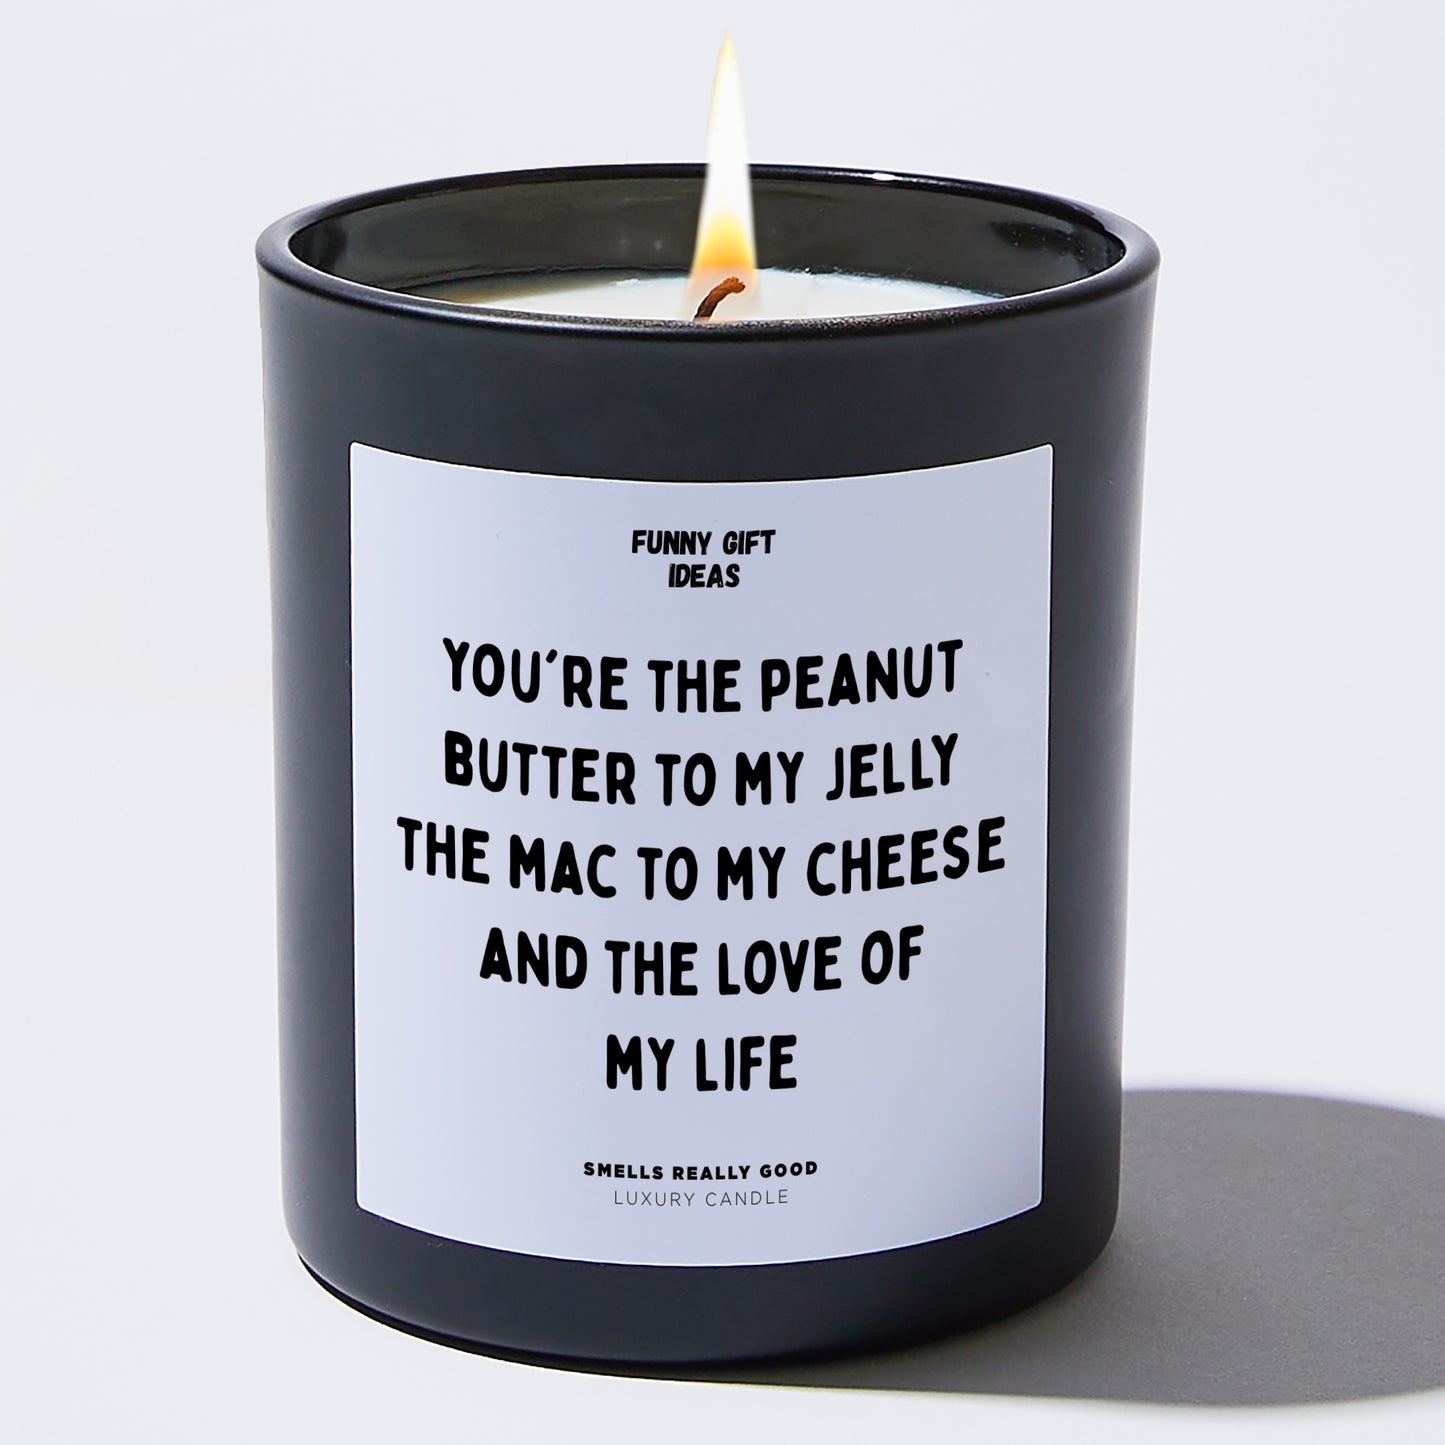 Anniversary Present - You're the Peanut Butter to My Jelly, the Mac to My Cheese, and the Love of My Life. - Candle